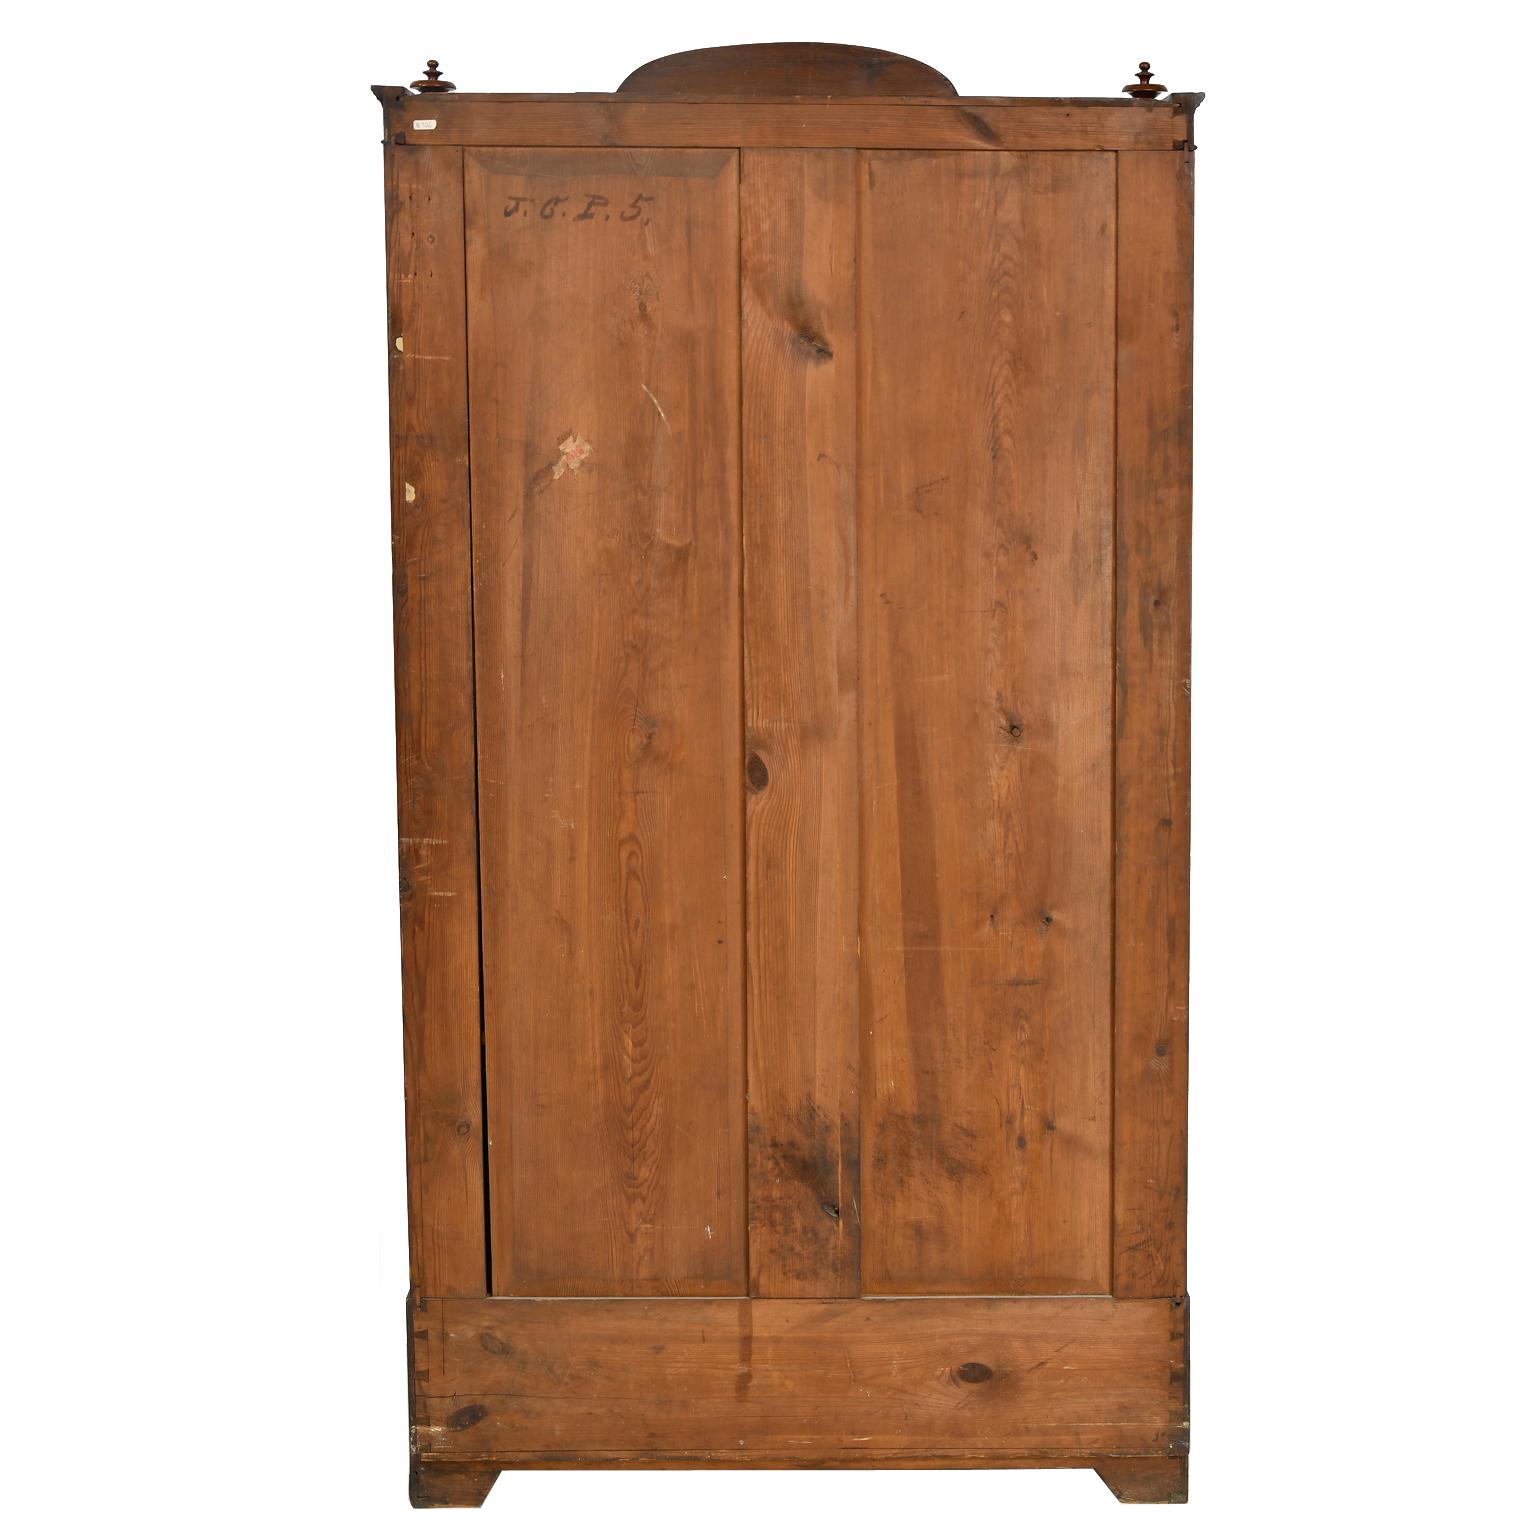 Mid-19th Century Antique Louis Philippe Bookcase / Vitrine in West Indies Mahogany, German